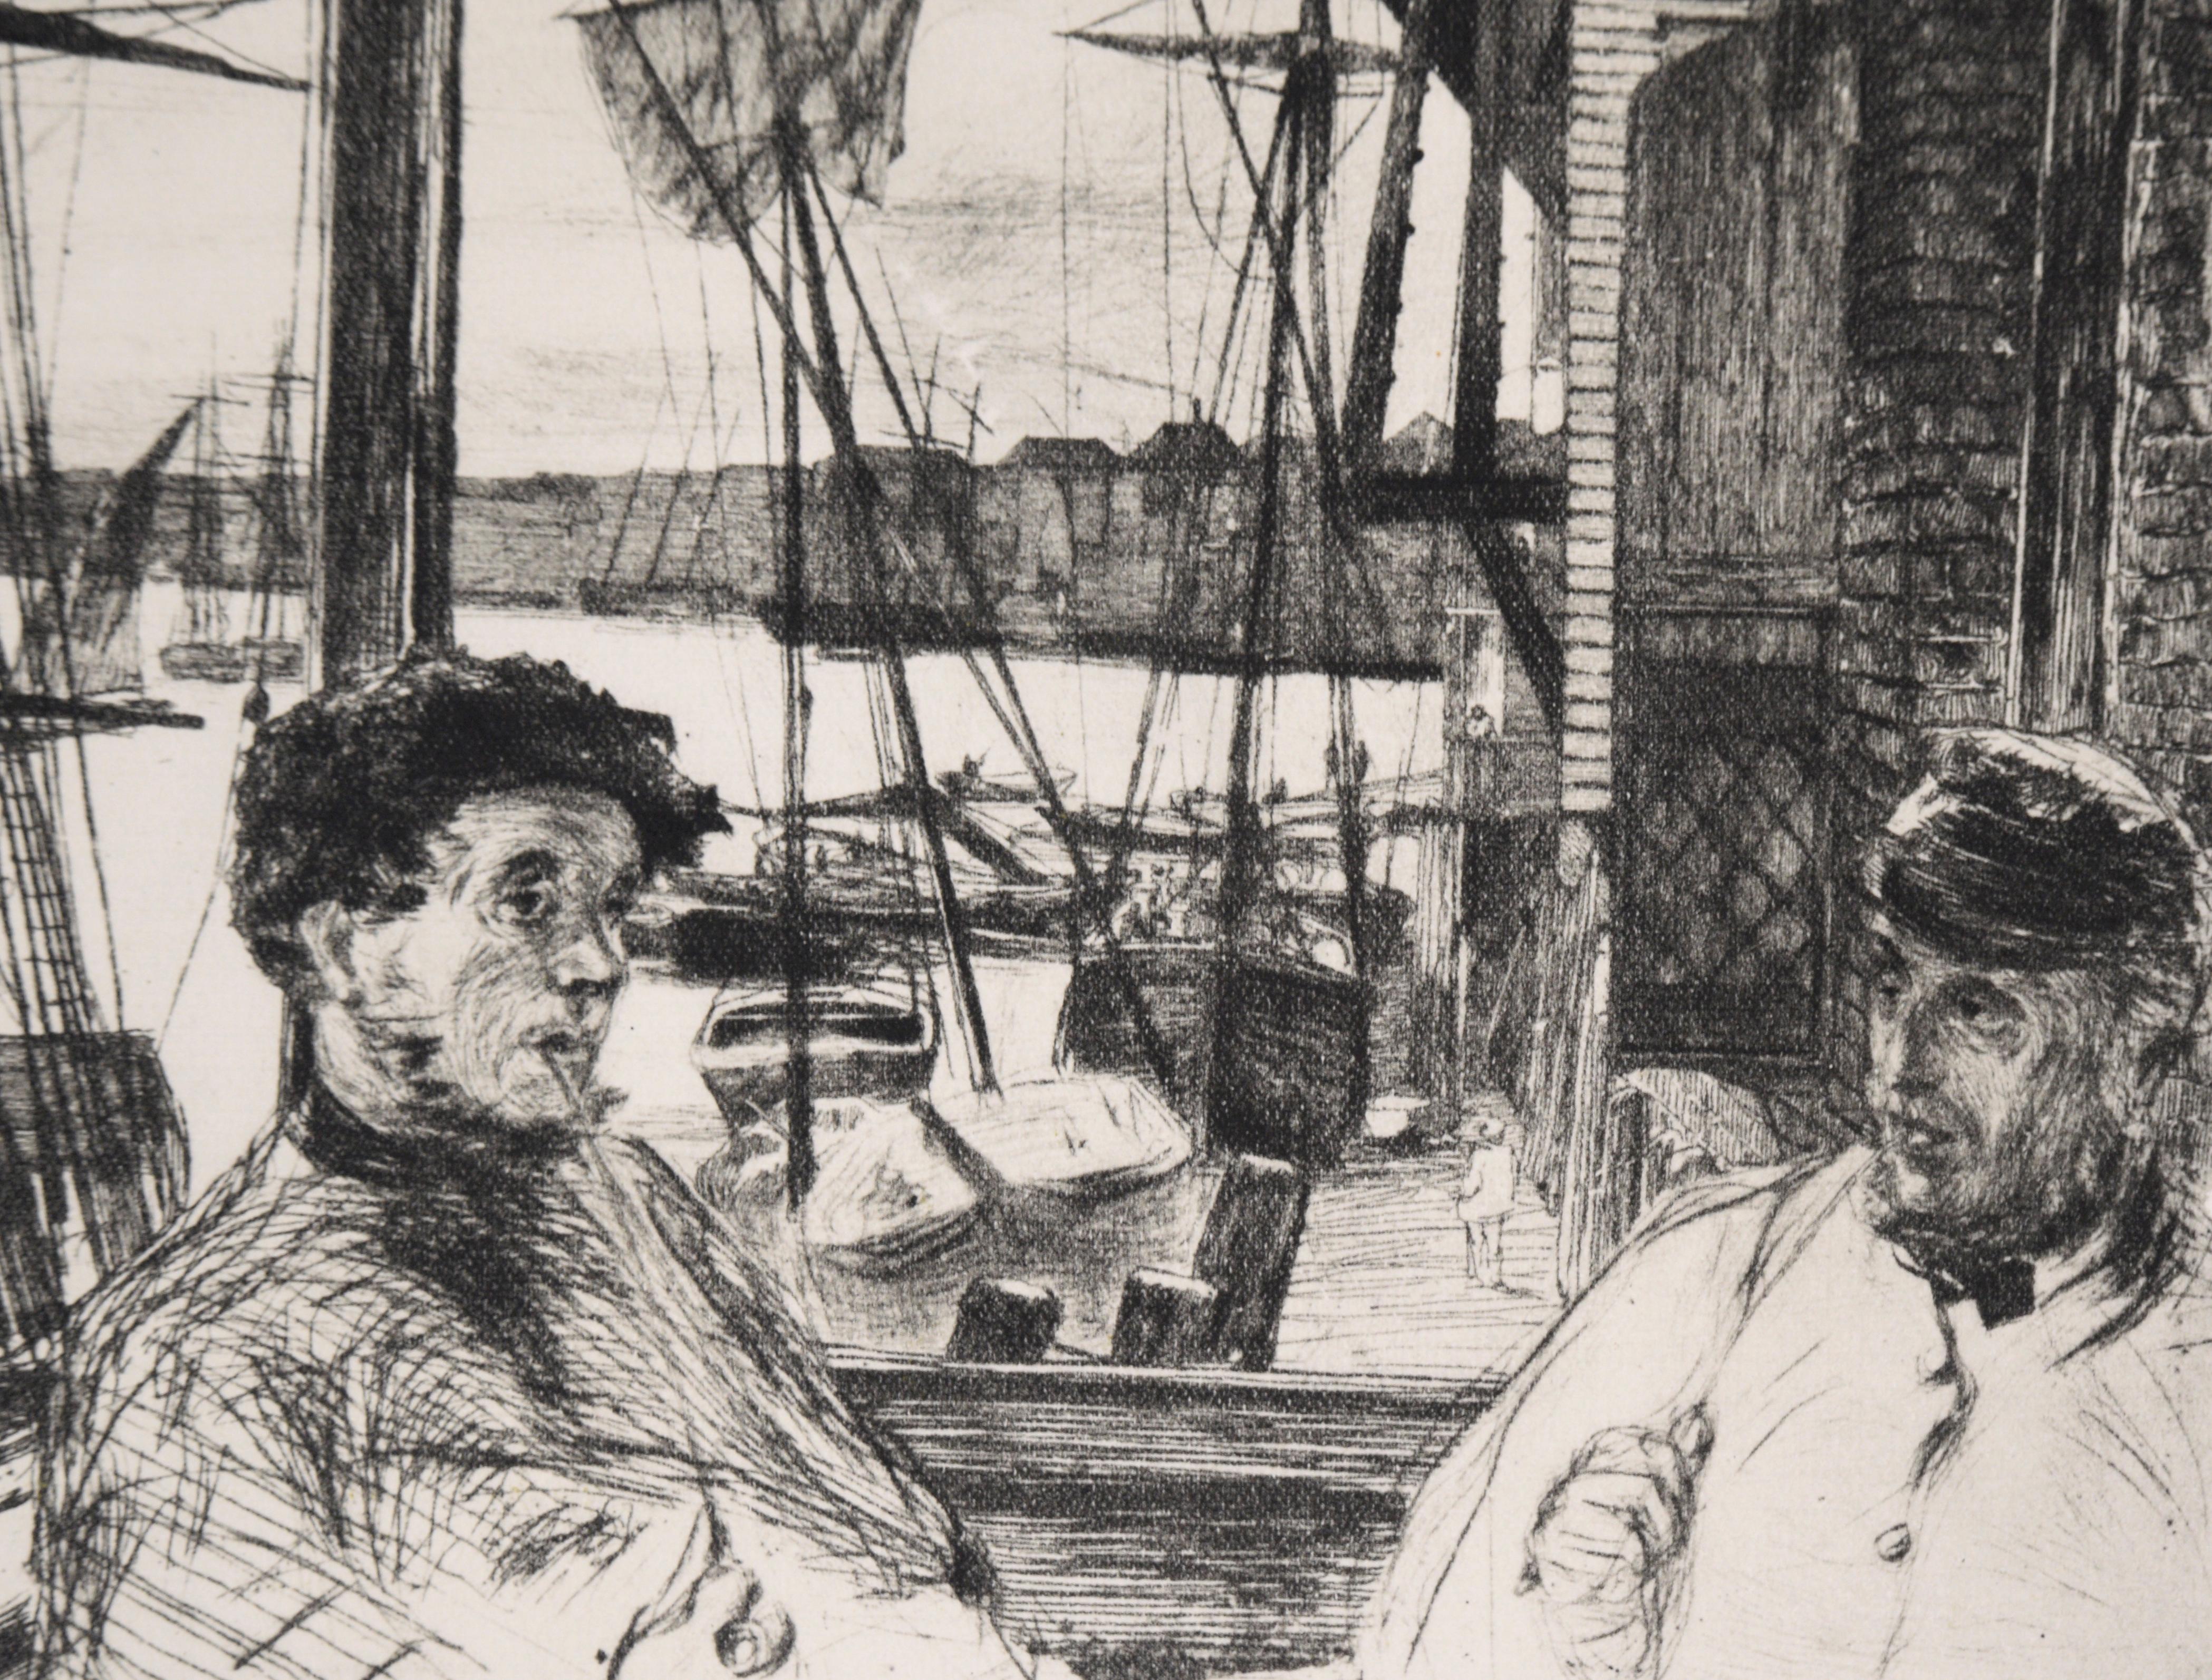 Etching from James A. M. Whistler's Thames Set (